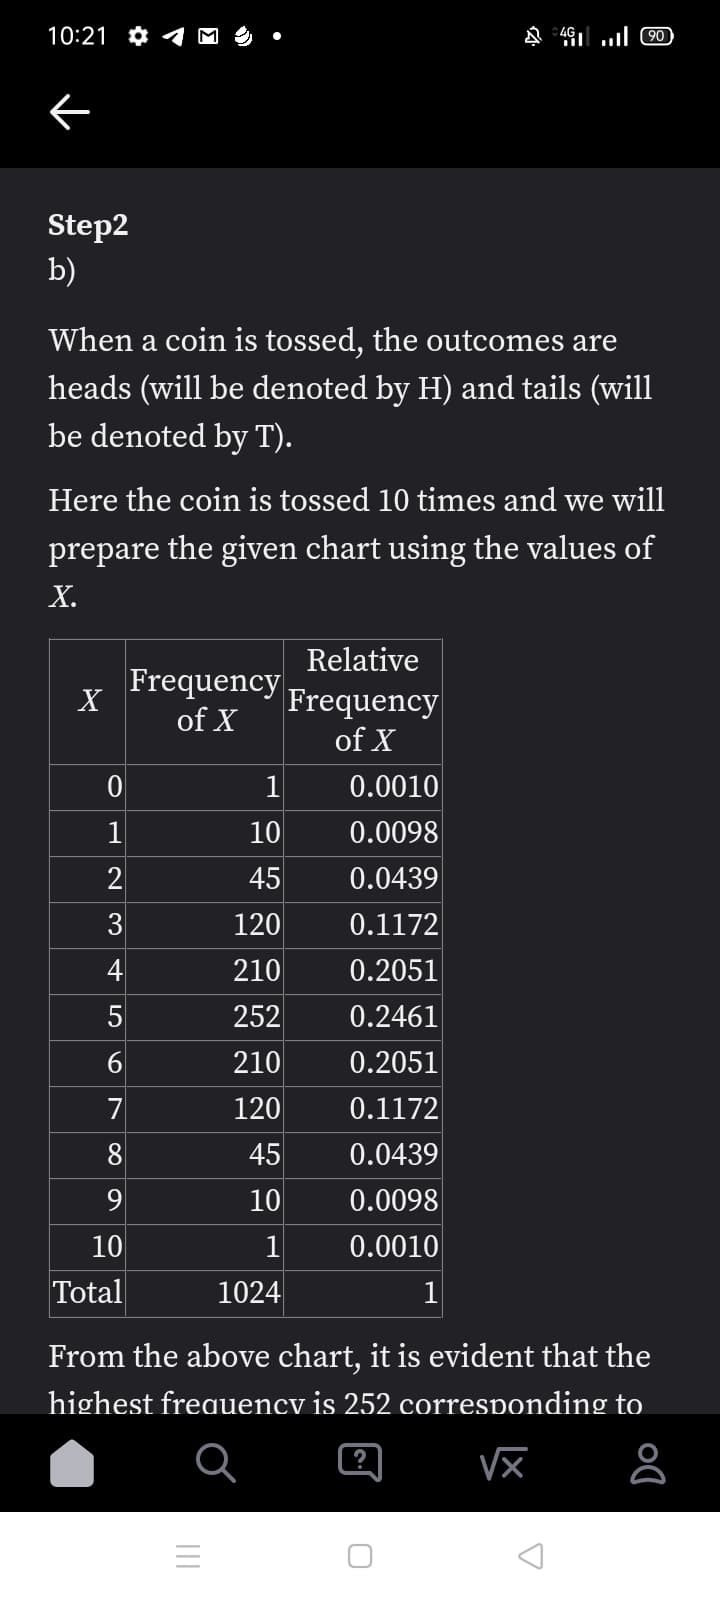 10:21 *
C0 1. ן% &
Step2
b)
When a coin is tossed, the outcomes are
heads (will be denoted by H) and tails (will
be denoted by T).
Here the coin is tossed 10 times and we will
prepare the given chart using the values of
Х.
Relative
Frequency
X
Frequency
of X
of X
1
0.0010
10
0.0098
2
45
0.0439
3
120
0.1172
4
210
0.2051
5
252
0.2461
210
0.2051
7
120
0.1172
8
45
0.0439
10
0.0098
10
1
0.0010
Total
1024
1
From the above chart, it is evident that the
highest freauency is 252 corresponding to
?
6
